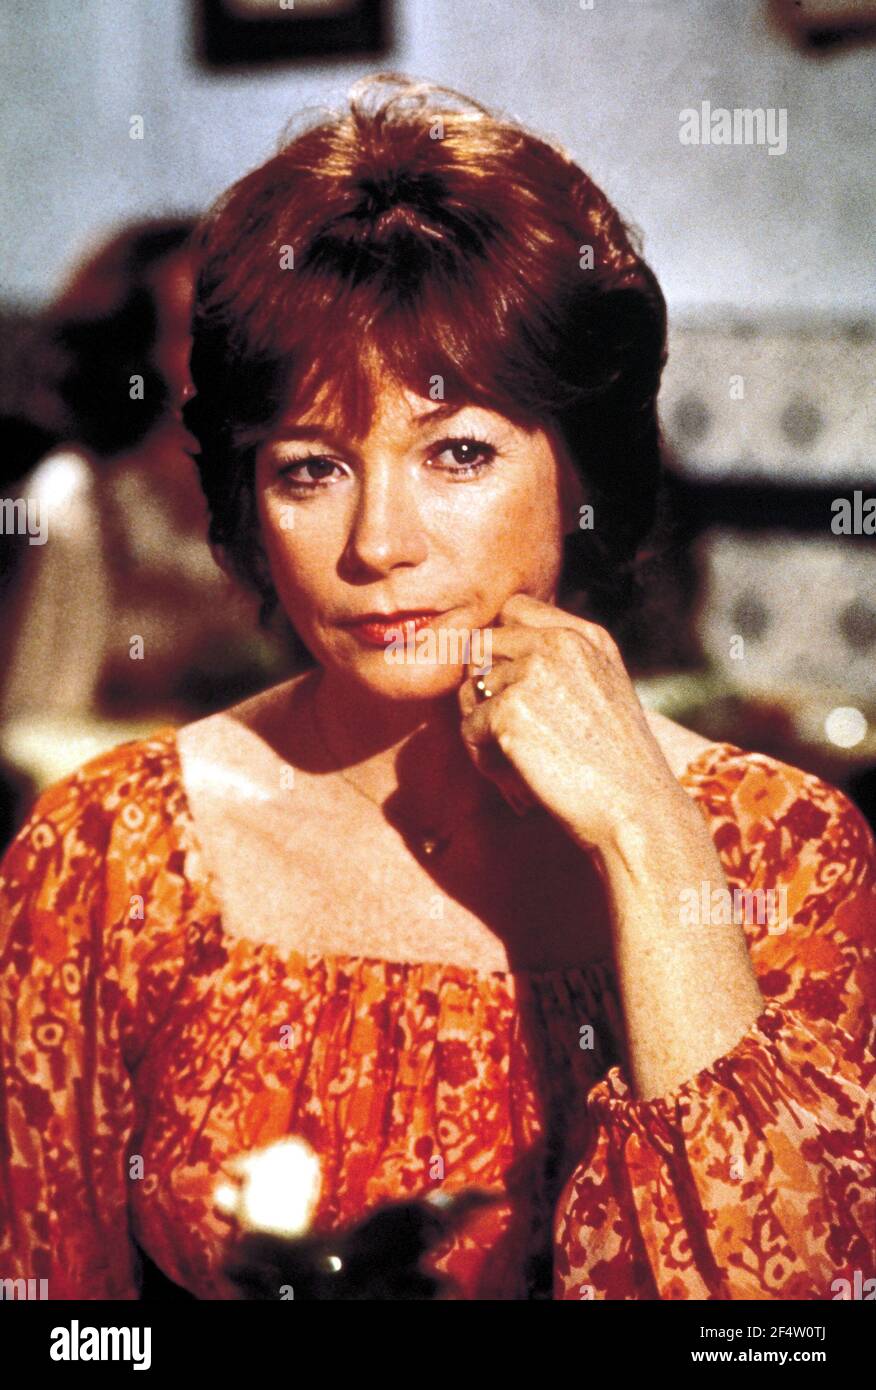 SHIRLEY MACLAINE in THE TURNING POINT (1977), directed by HERBERT ROSS. Credit: 20TH CENTURY FOX / Album Stock Photo